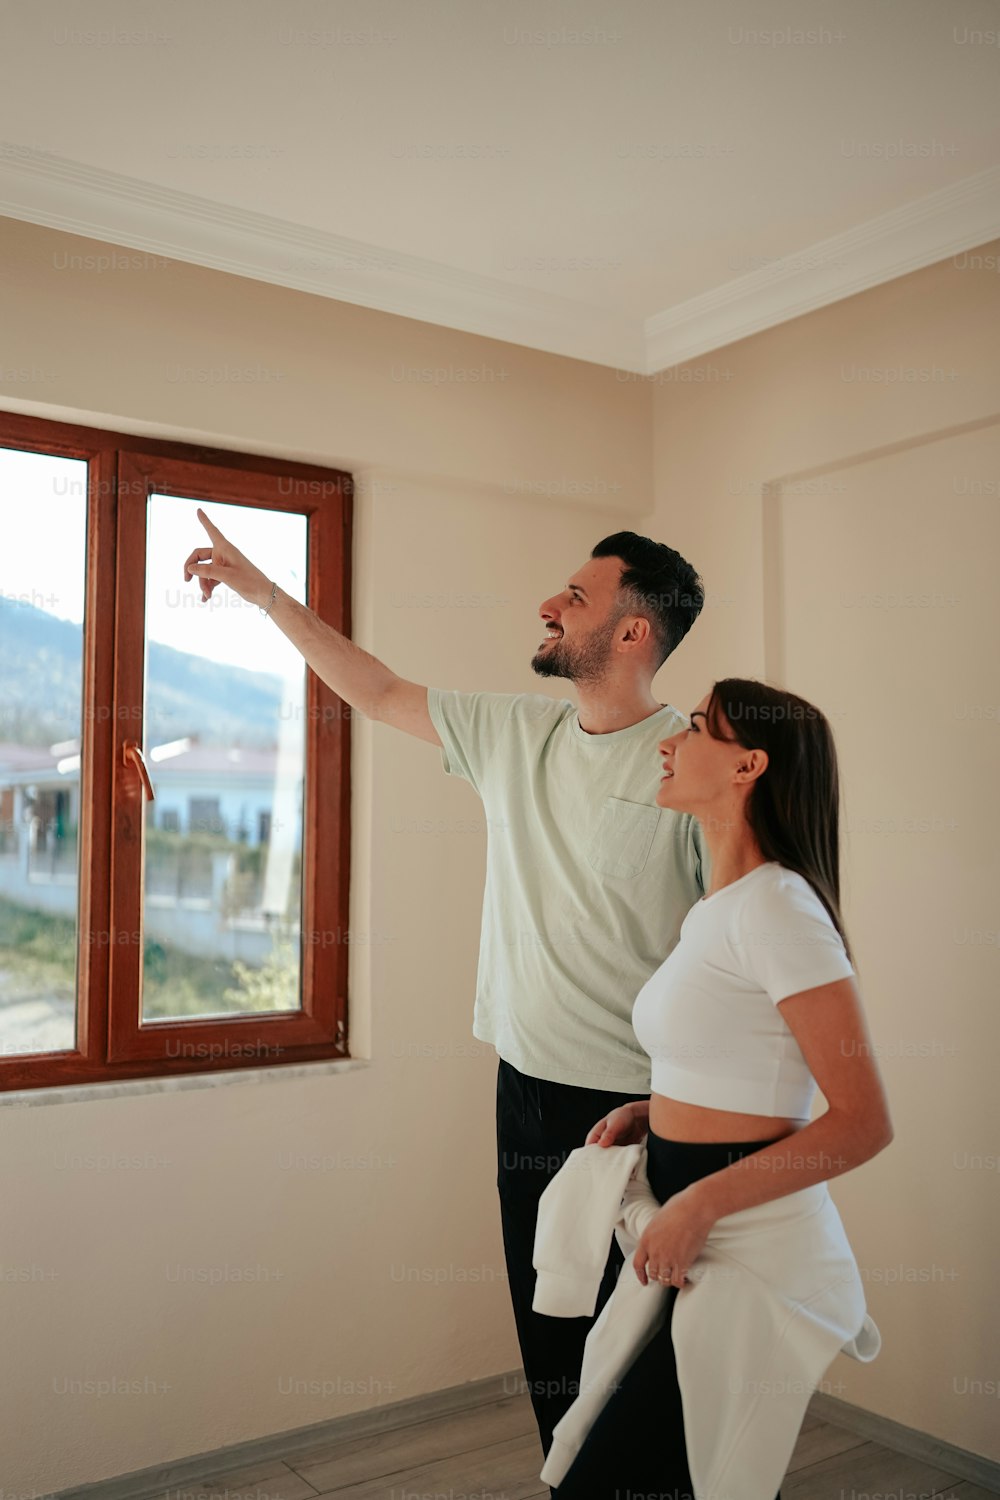 a man and a woman standing in front of a window